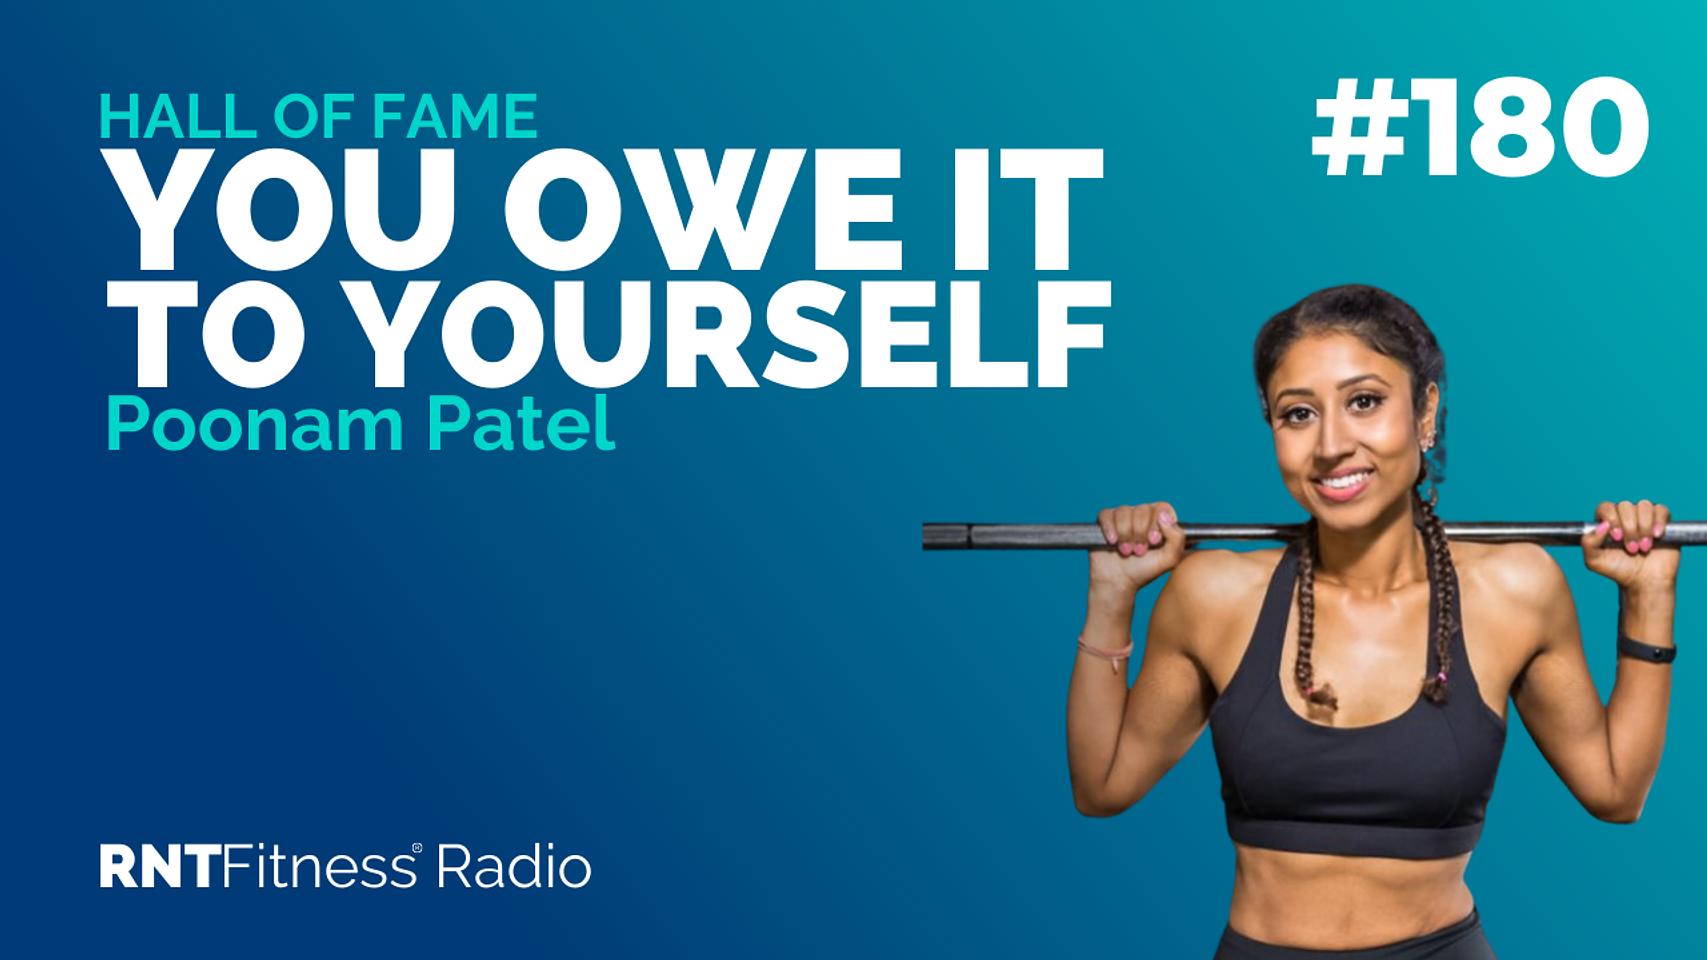 Ep. 180 - Hall of Fame | Poonam Patel - You Owe It To Yourself